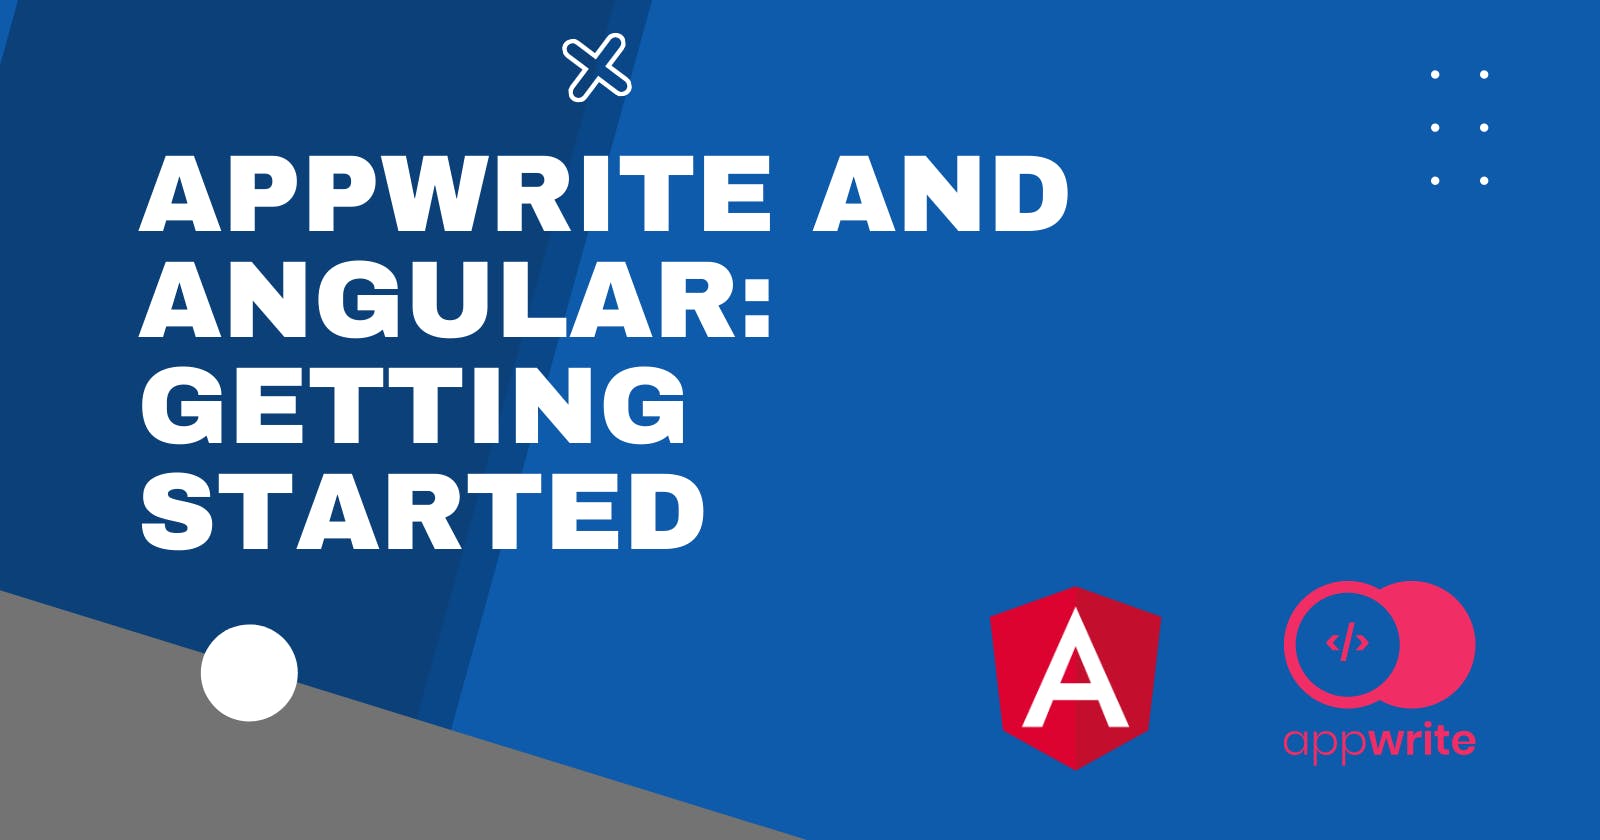 Appwrite and angular: Getting started